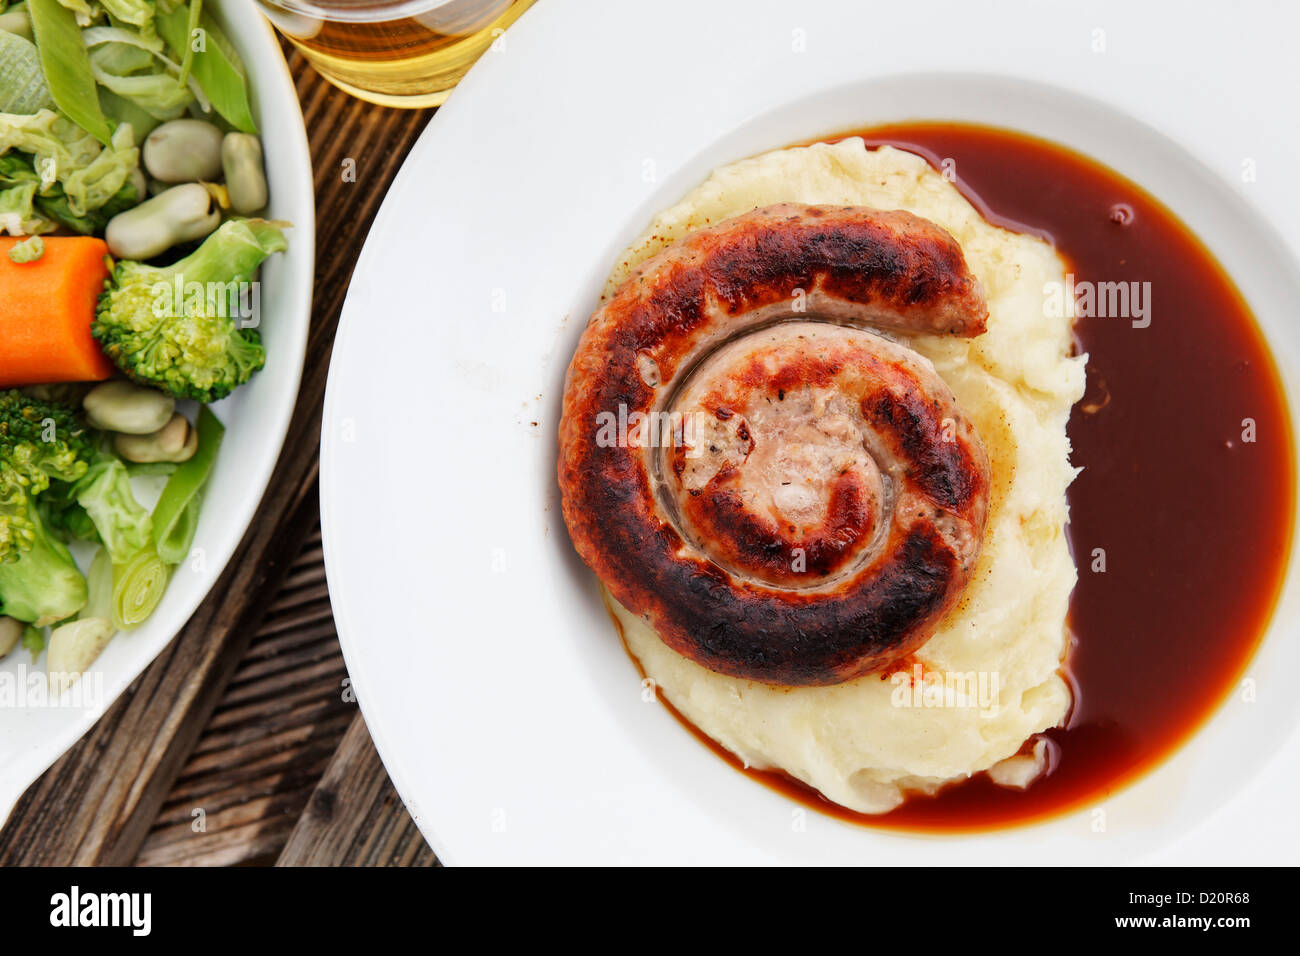 Pork sausage with mashed potatoes and vegetables, Stanton, Gloucestershire, Cotswolds, England, Great Britain, Europe Stock Photo